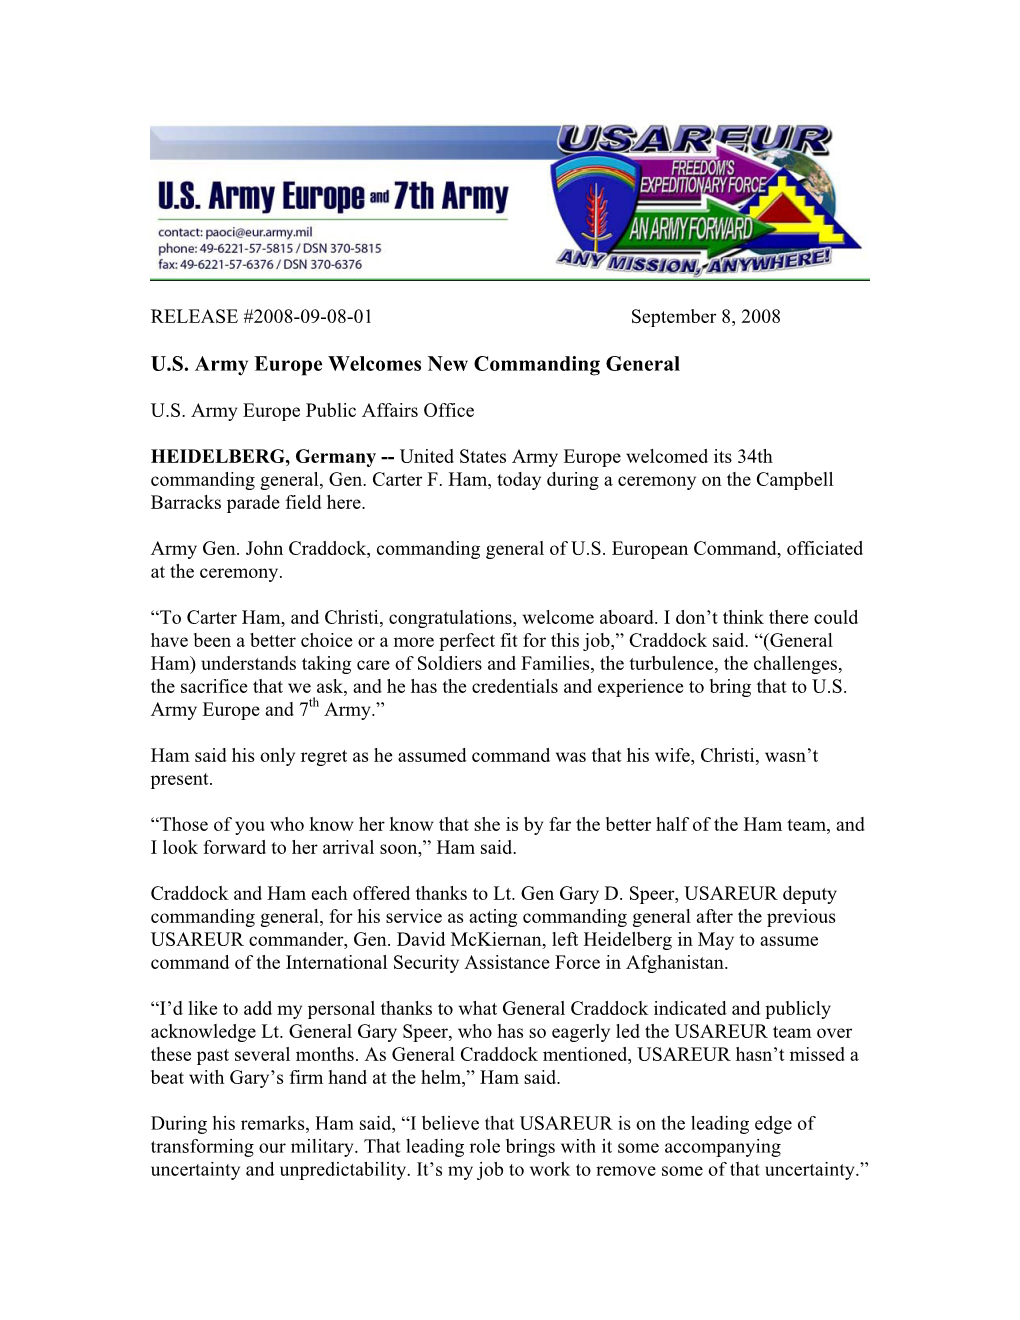 U.S. Army Europe Welcomes New Commanding General